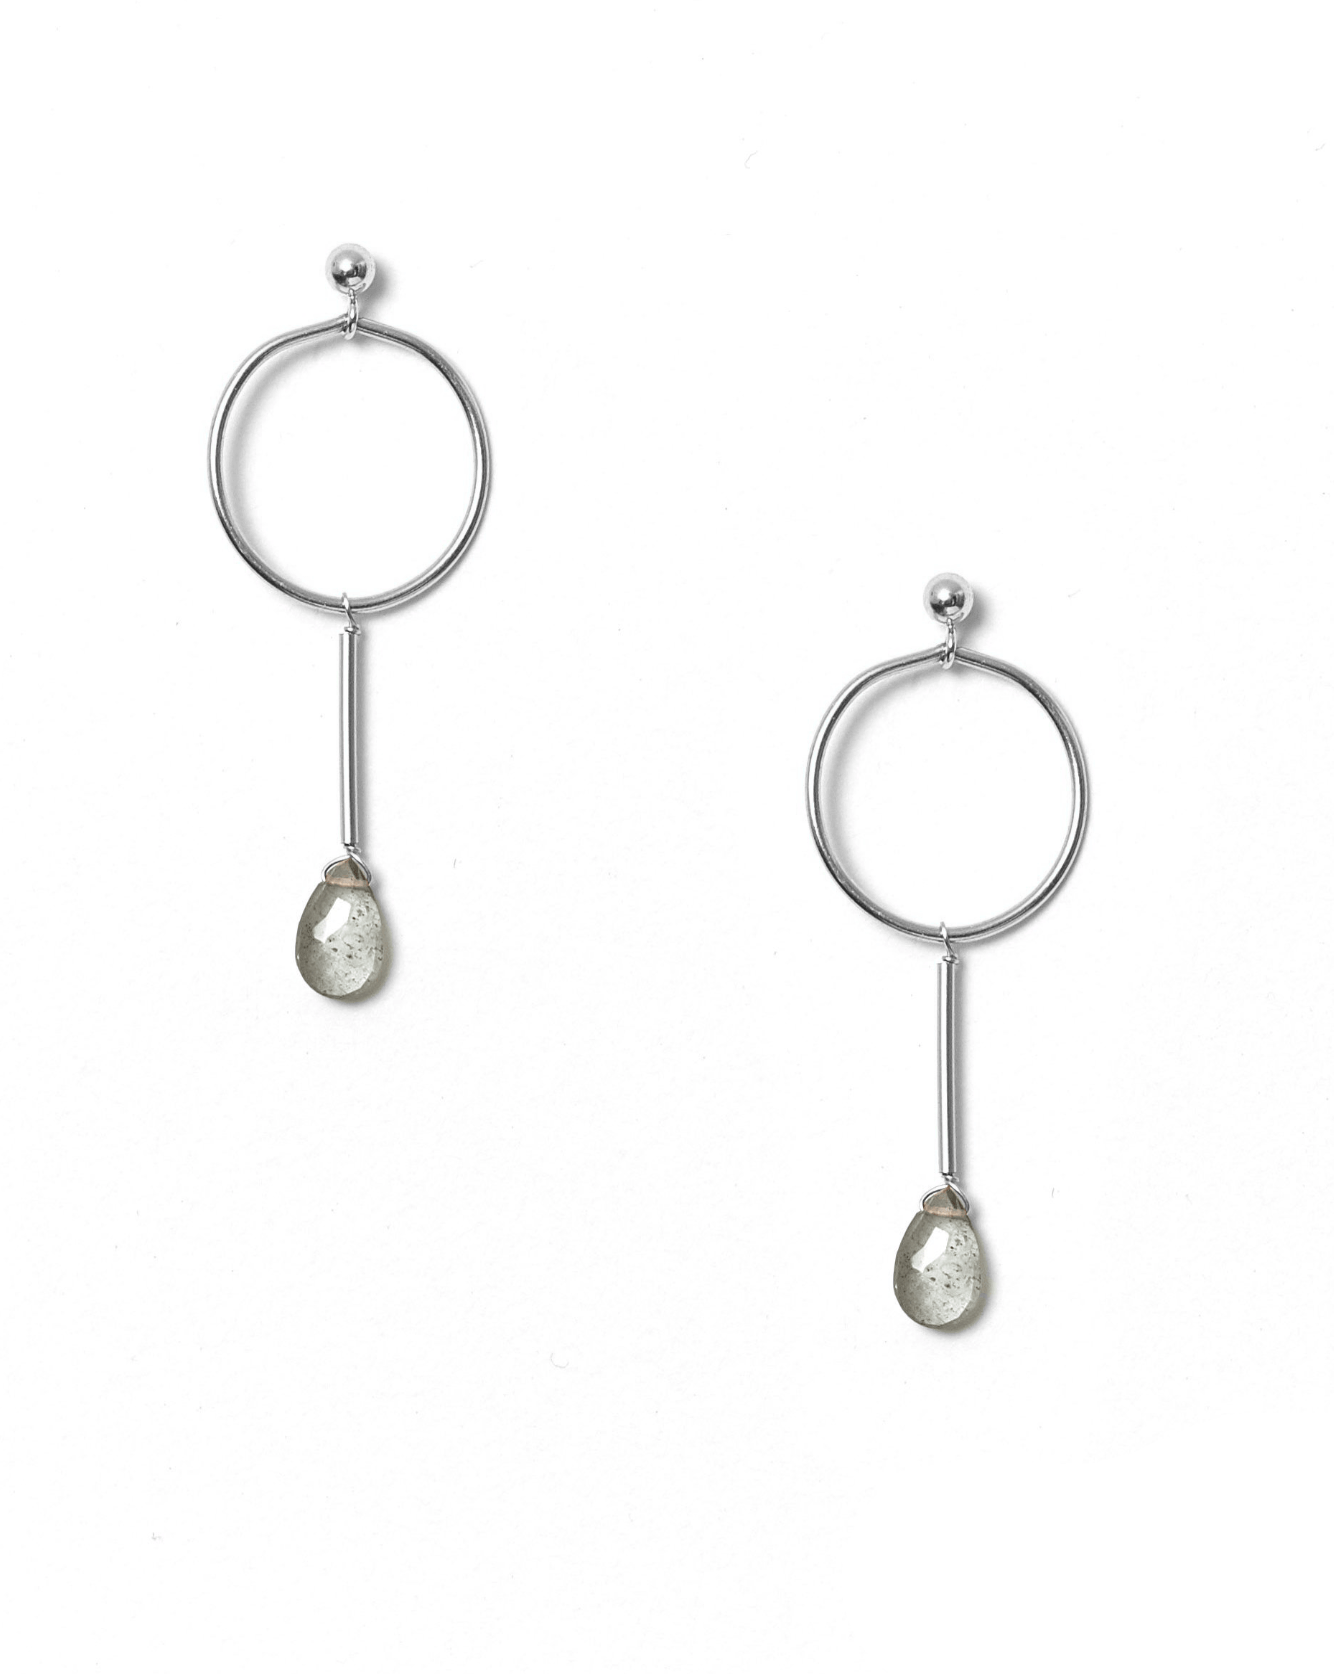 Osea Earrings by KOZAKH. Ball stud drop earrings in Sterling Silver, featuring a faceted Moss Aquamarine droplet.